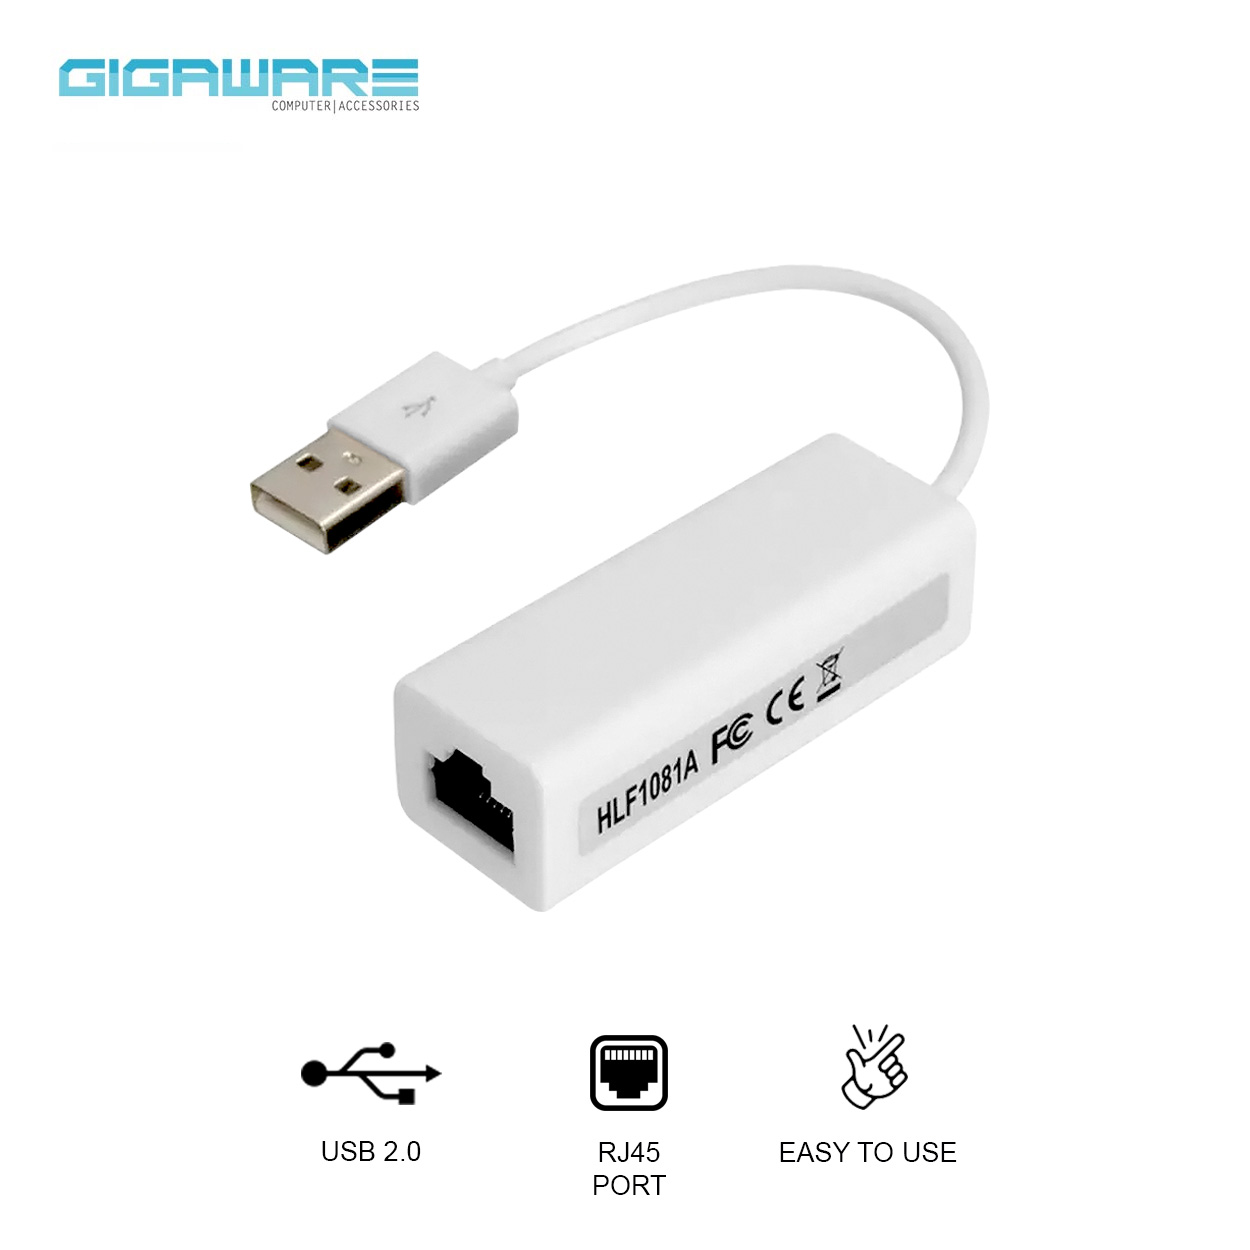 gigaware usb to ethernet adapter driver